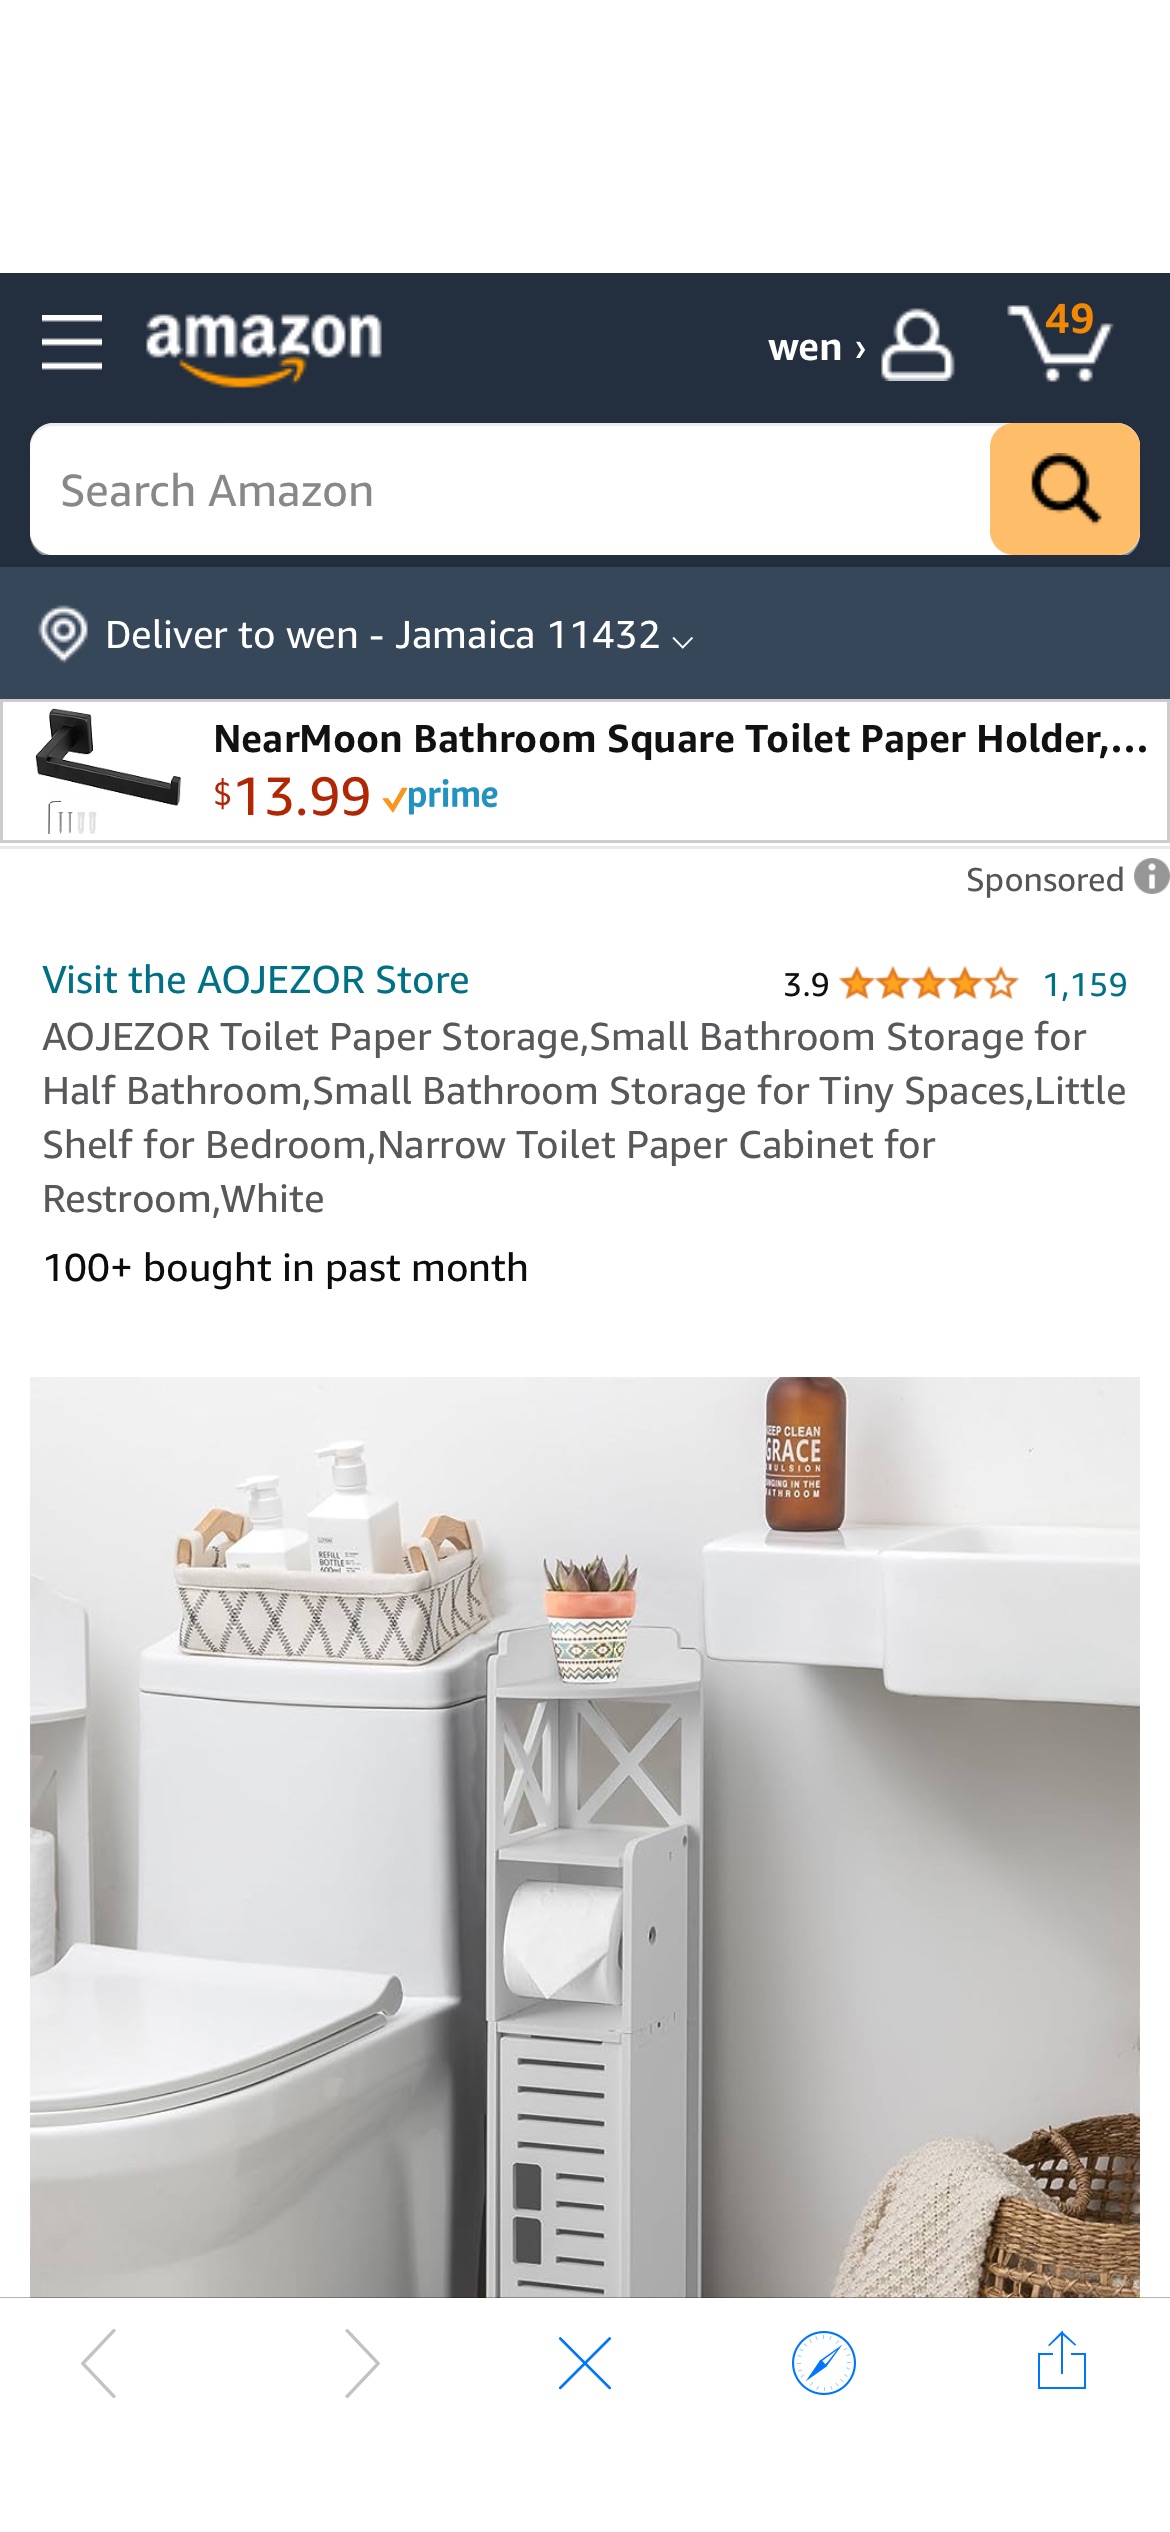 Amazon.com: AOJEZOR Toilet Paper Storage,Small Bathroom Storage for Half Bathroom,Small Bathroom Storage for Tiny Spaces,Little Shelf for Bedroom,Narrow Toilet Paper Cabinet for Restroom,White : Home 